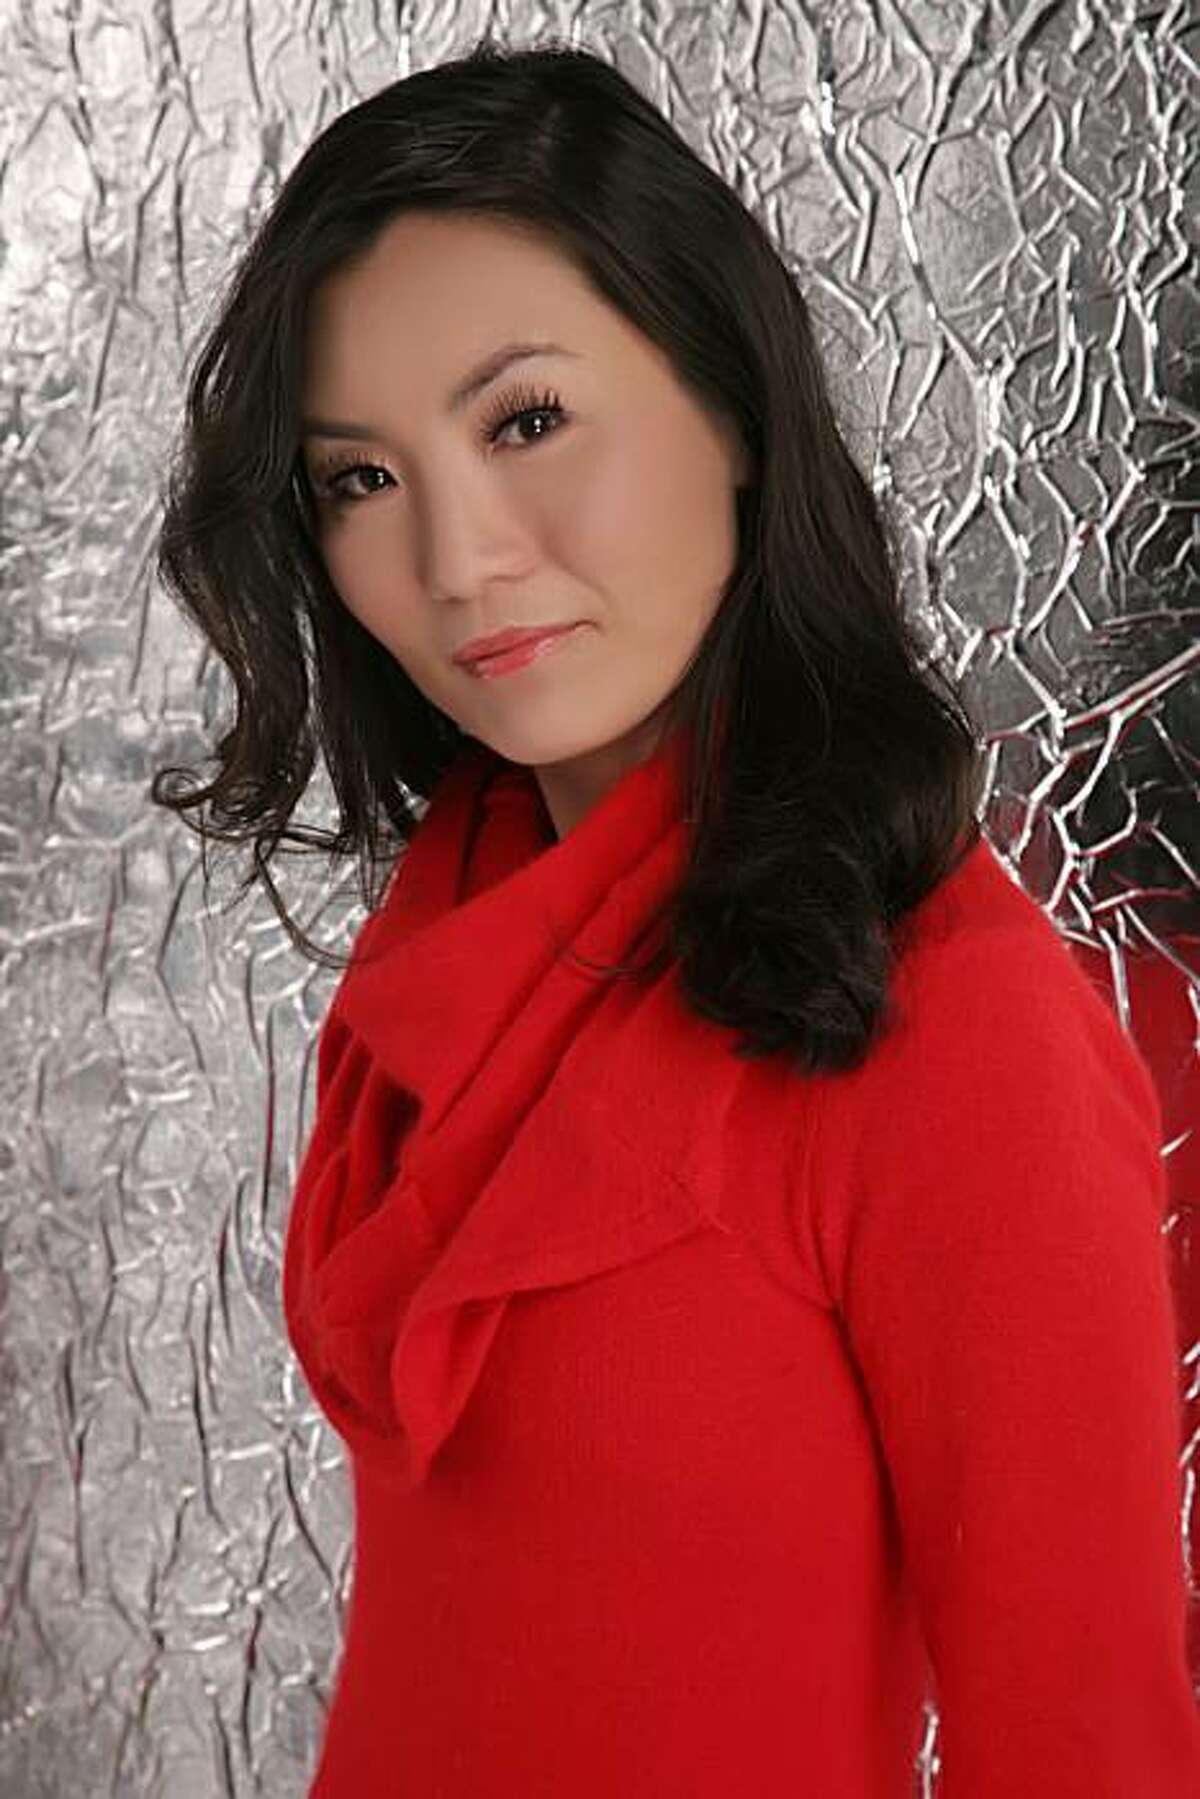 Ying Chang Compestine, author (handout)